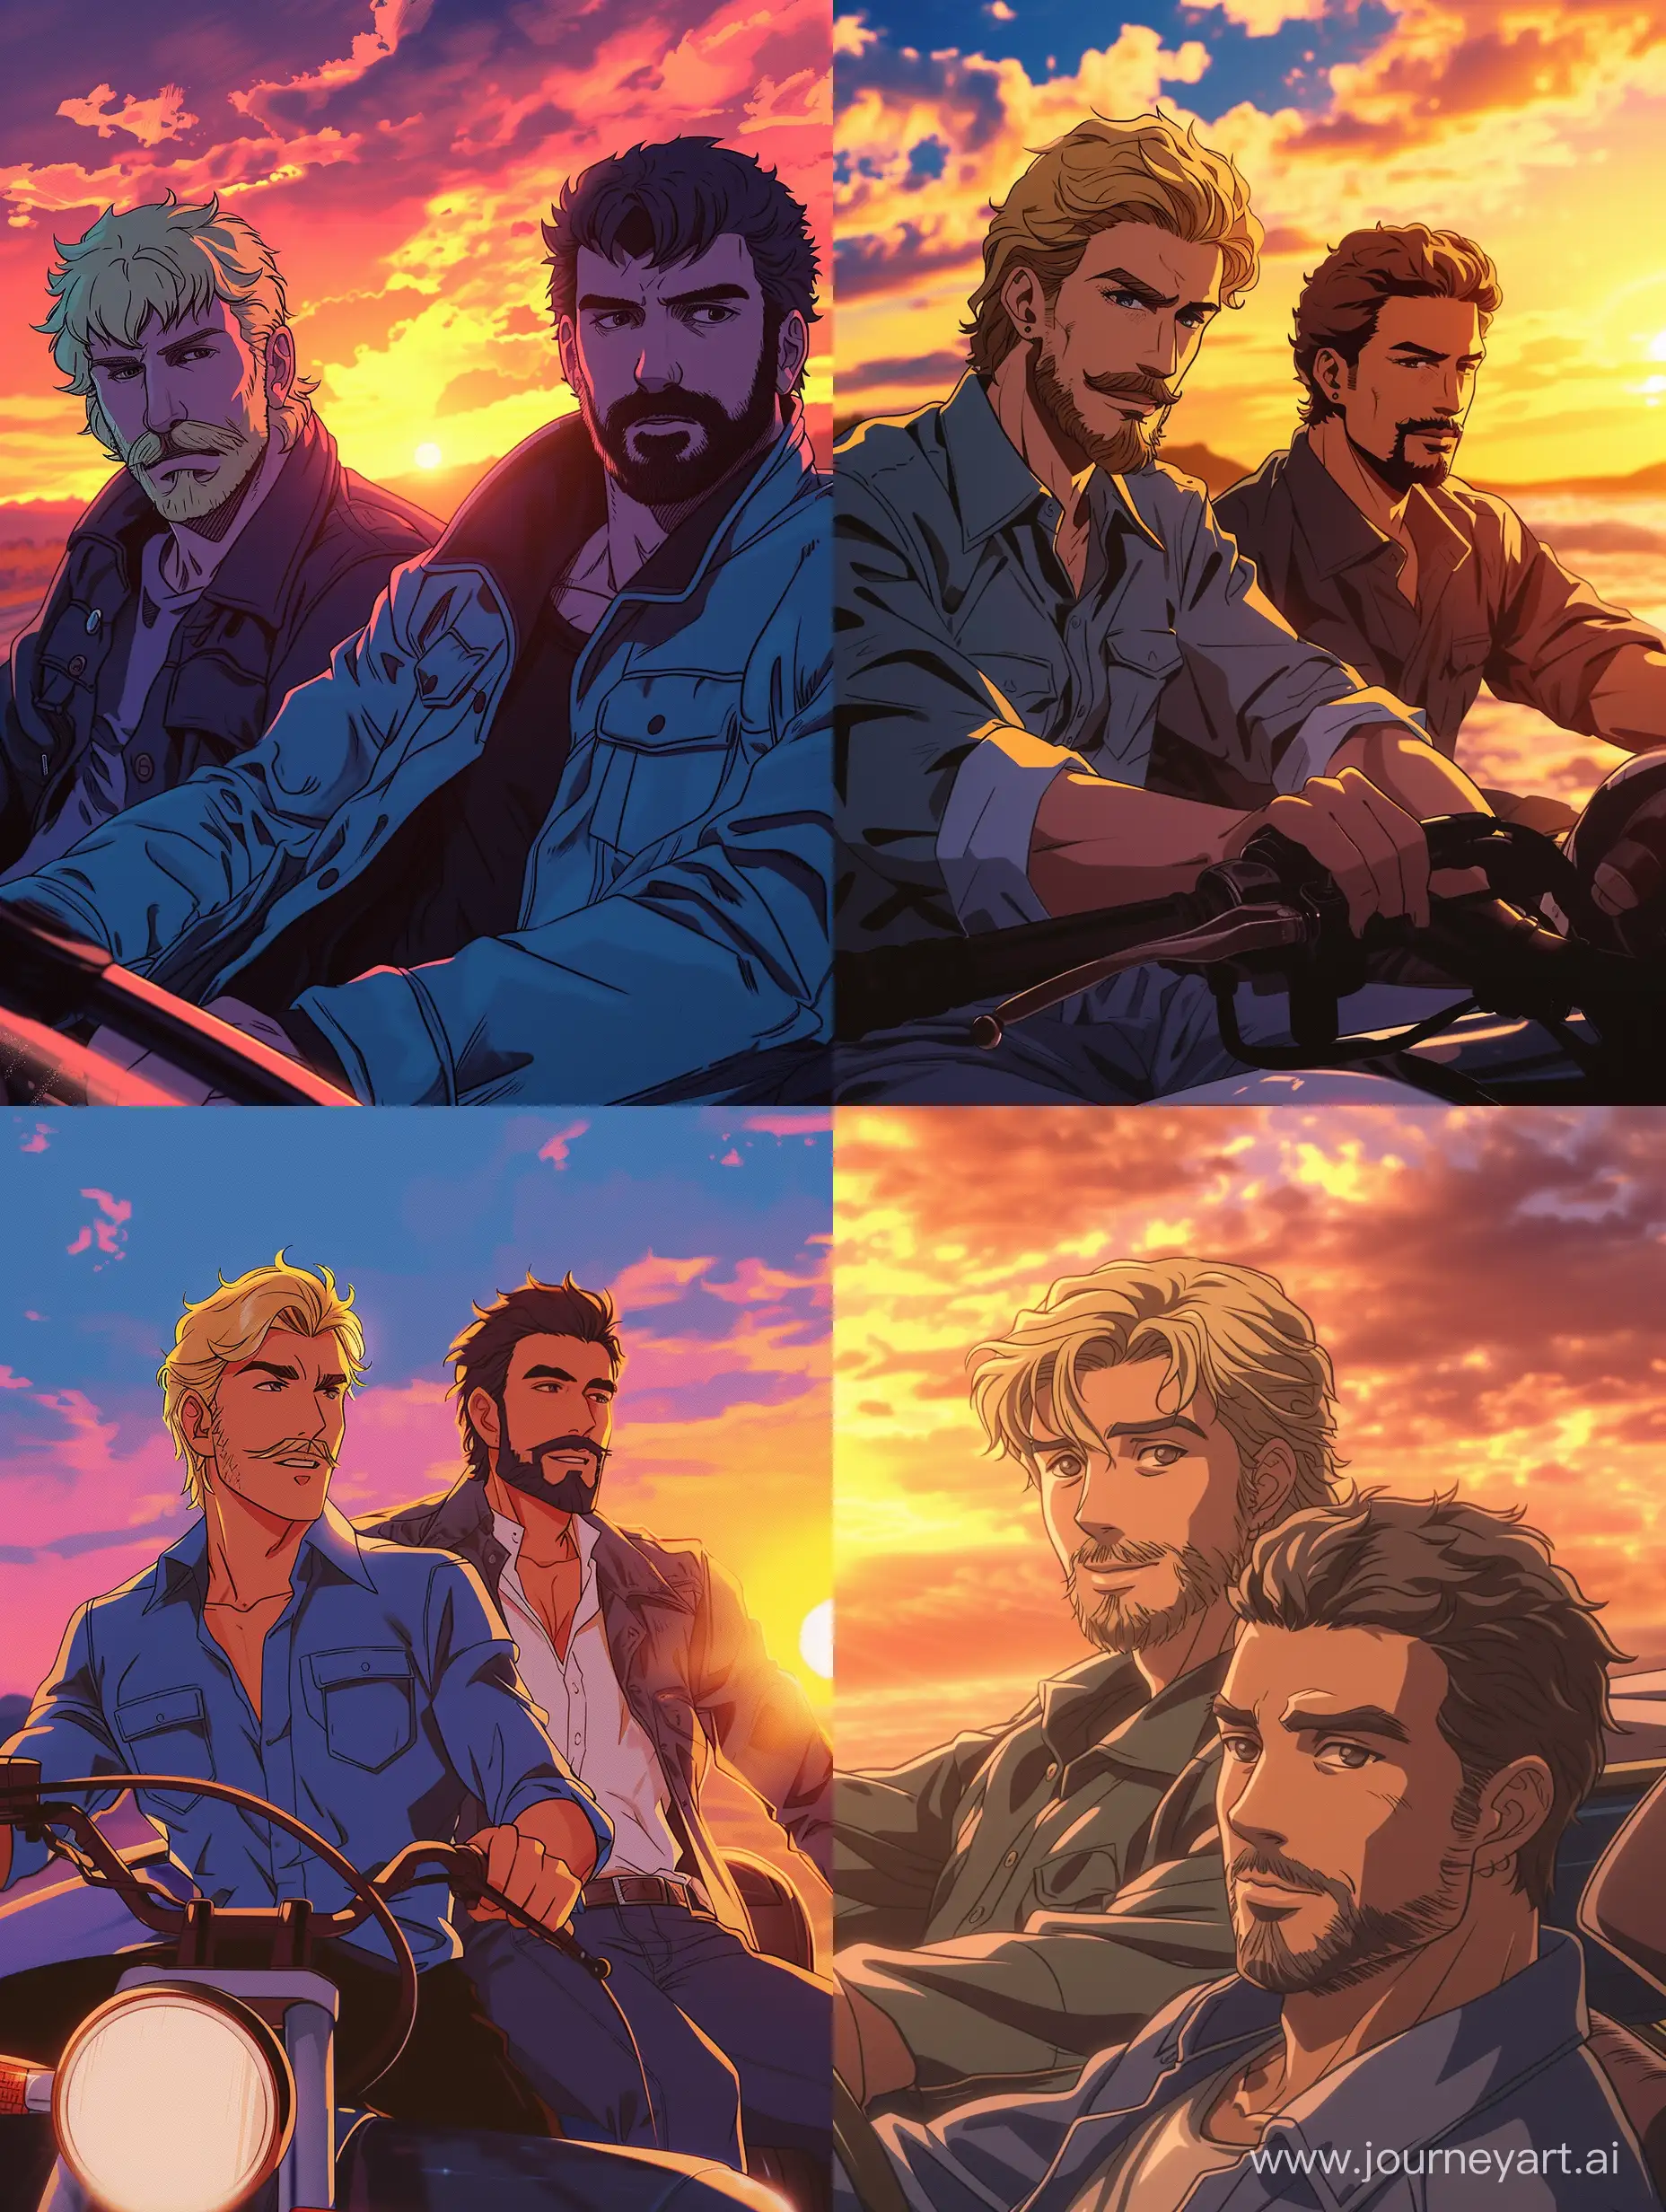 Two-Retro-Friends-Riding-into-the-Sunset-in-80s-Anime-Cabriolet-Adventure